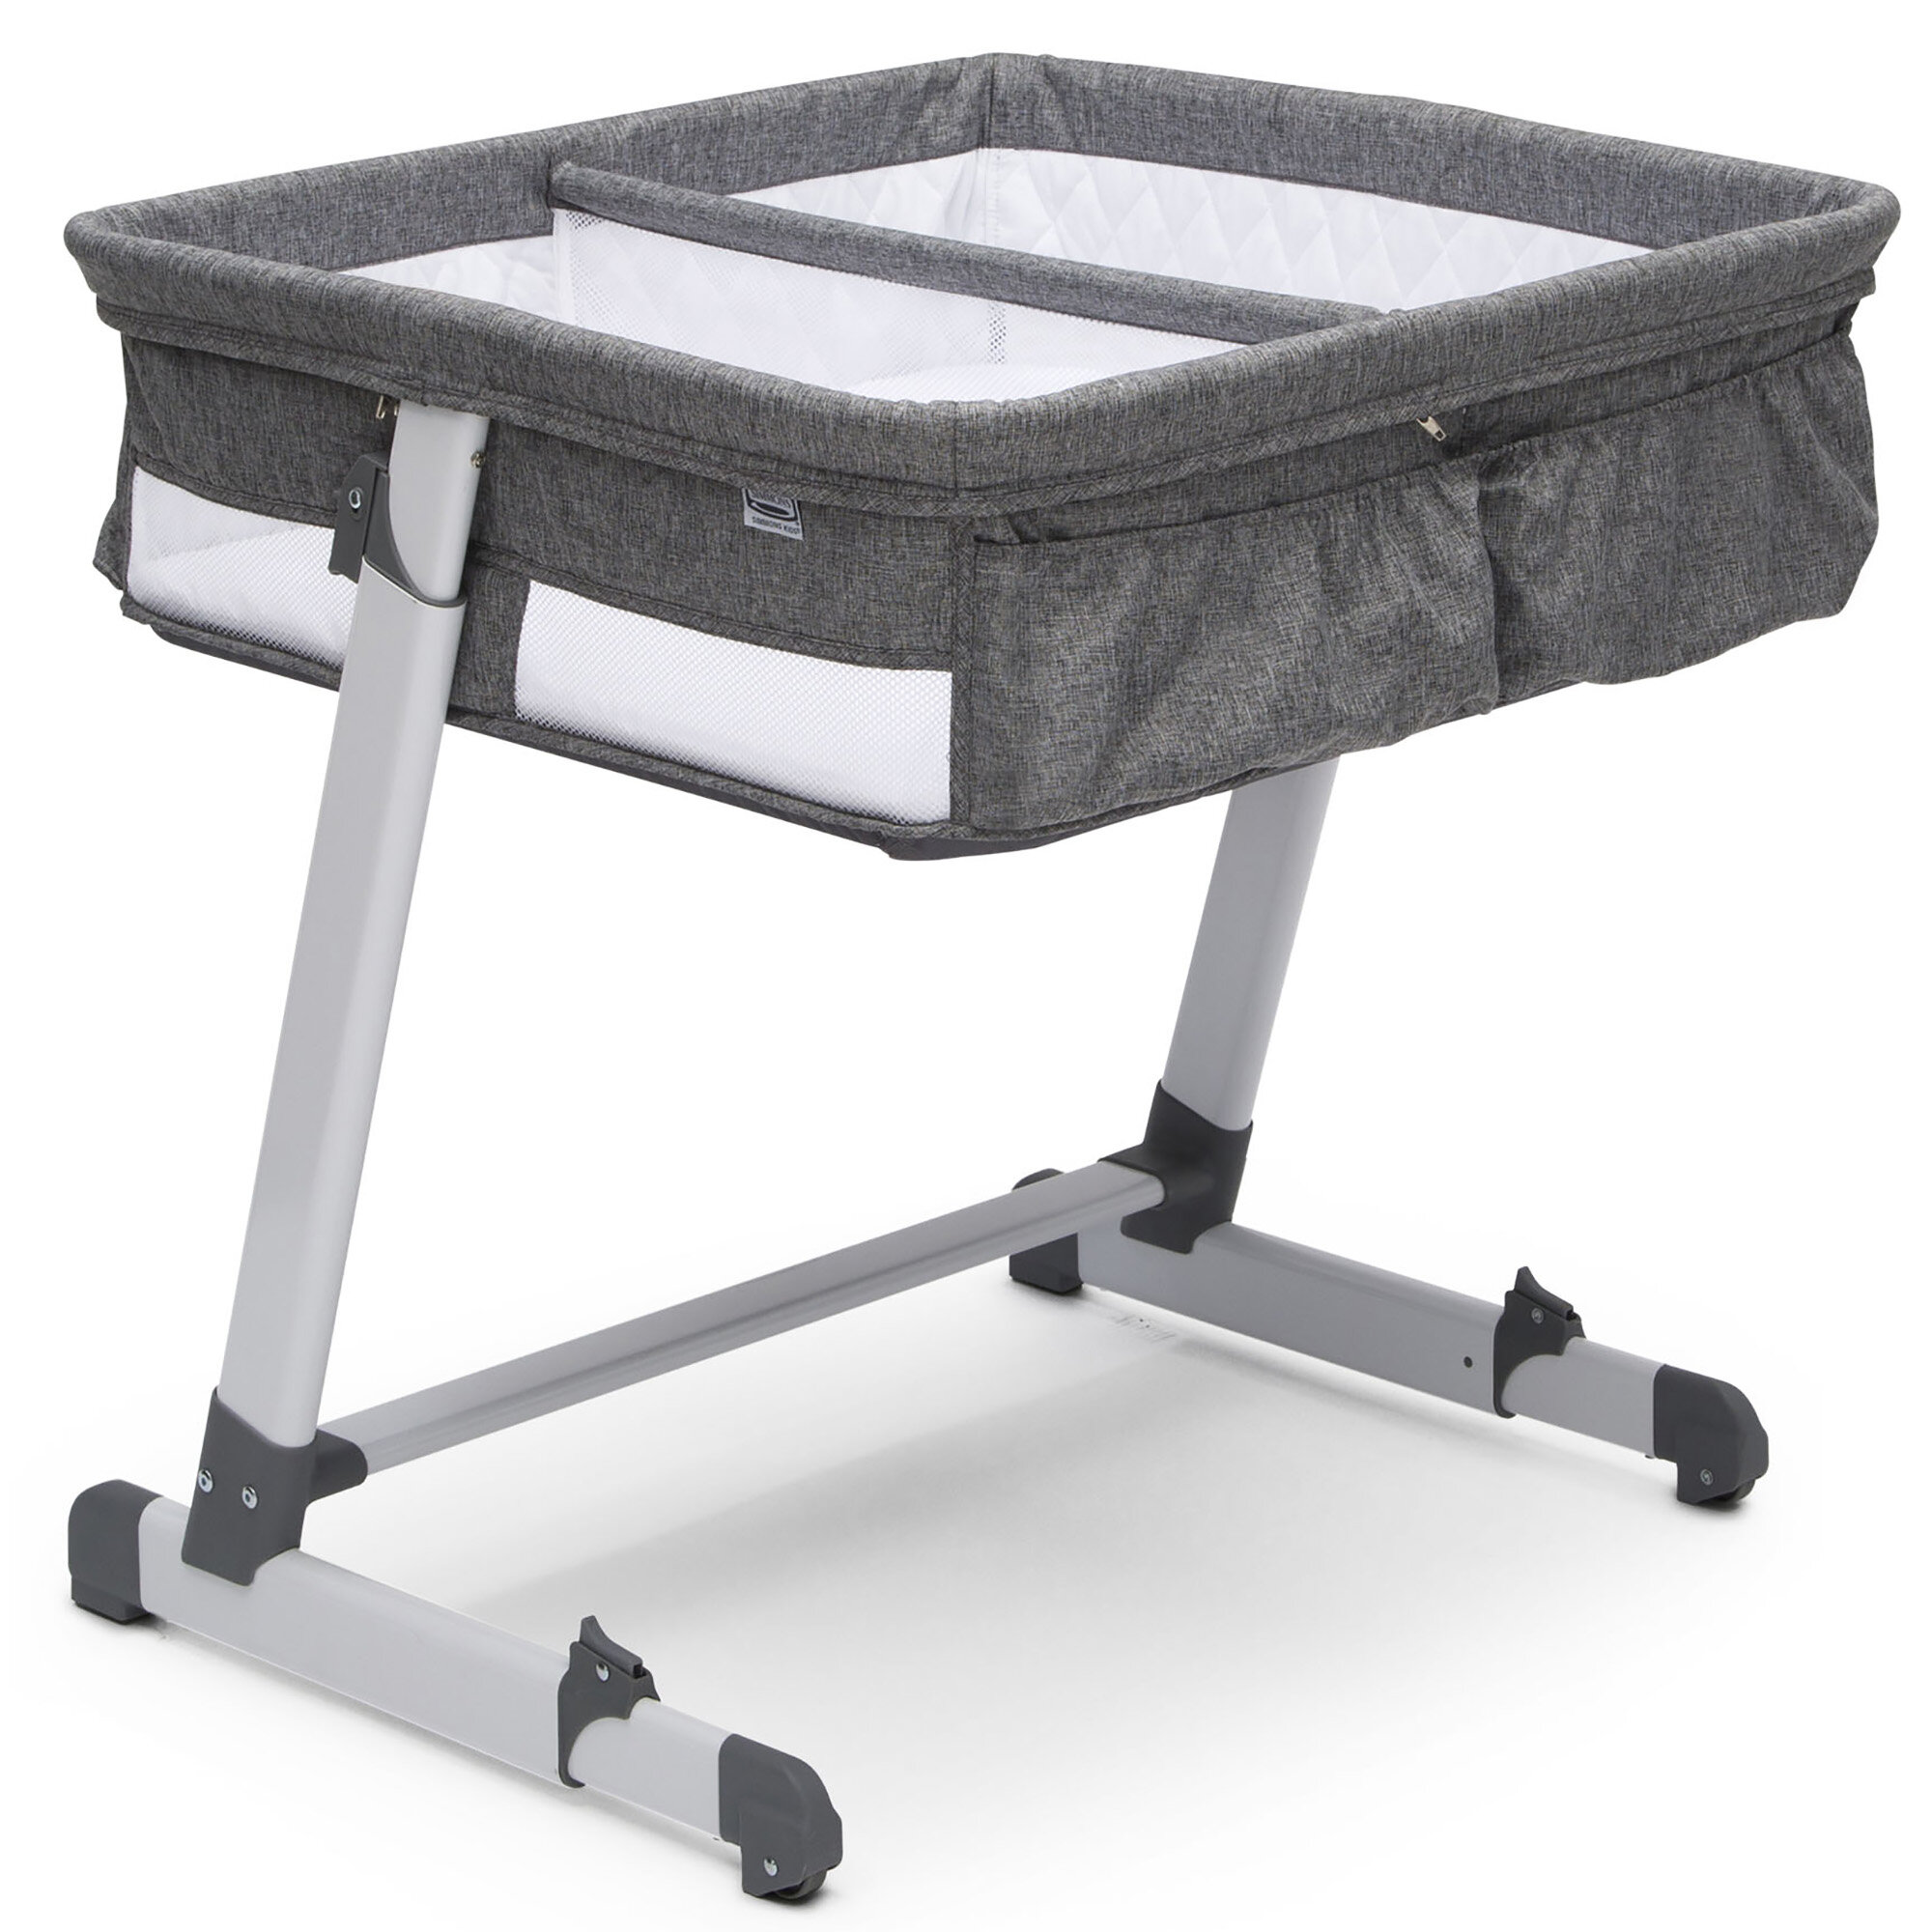 bed baby bassinet